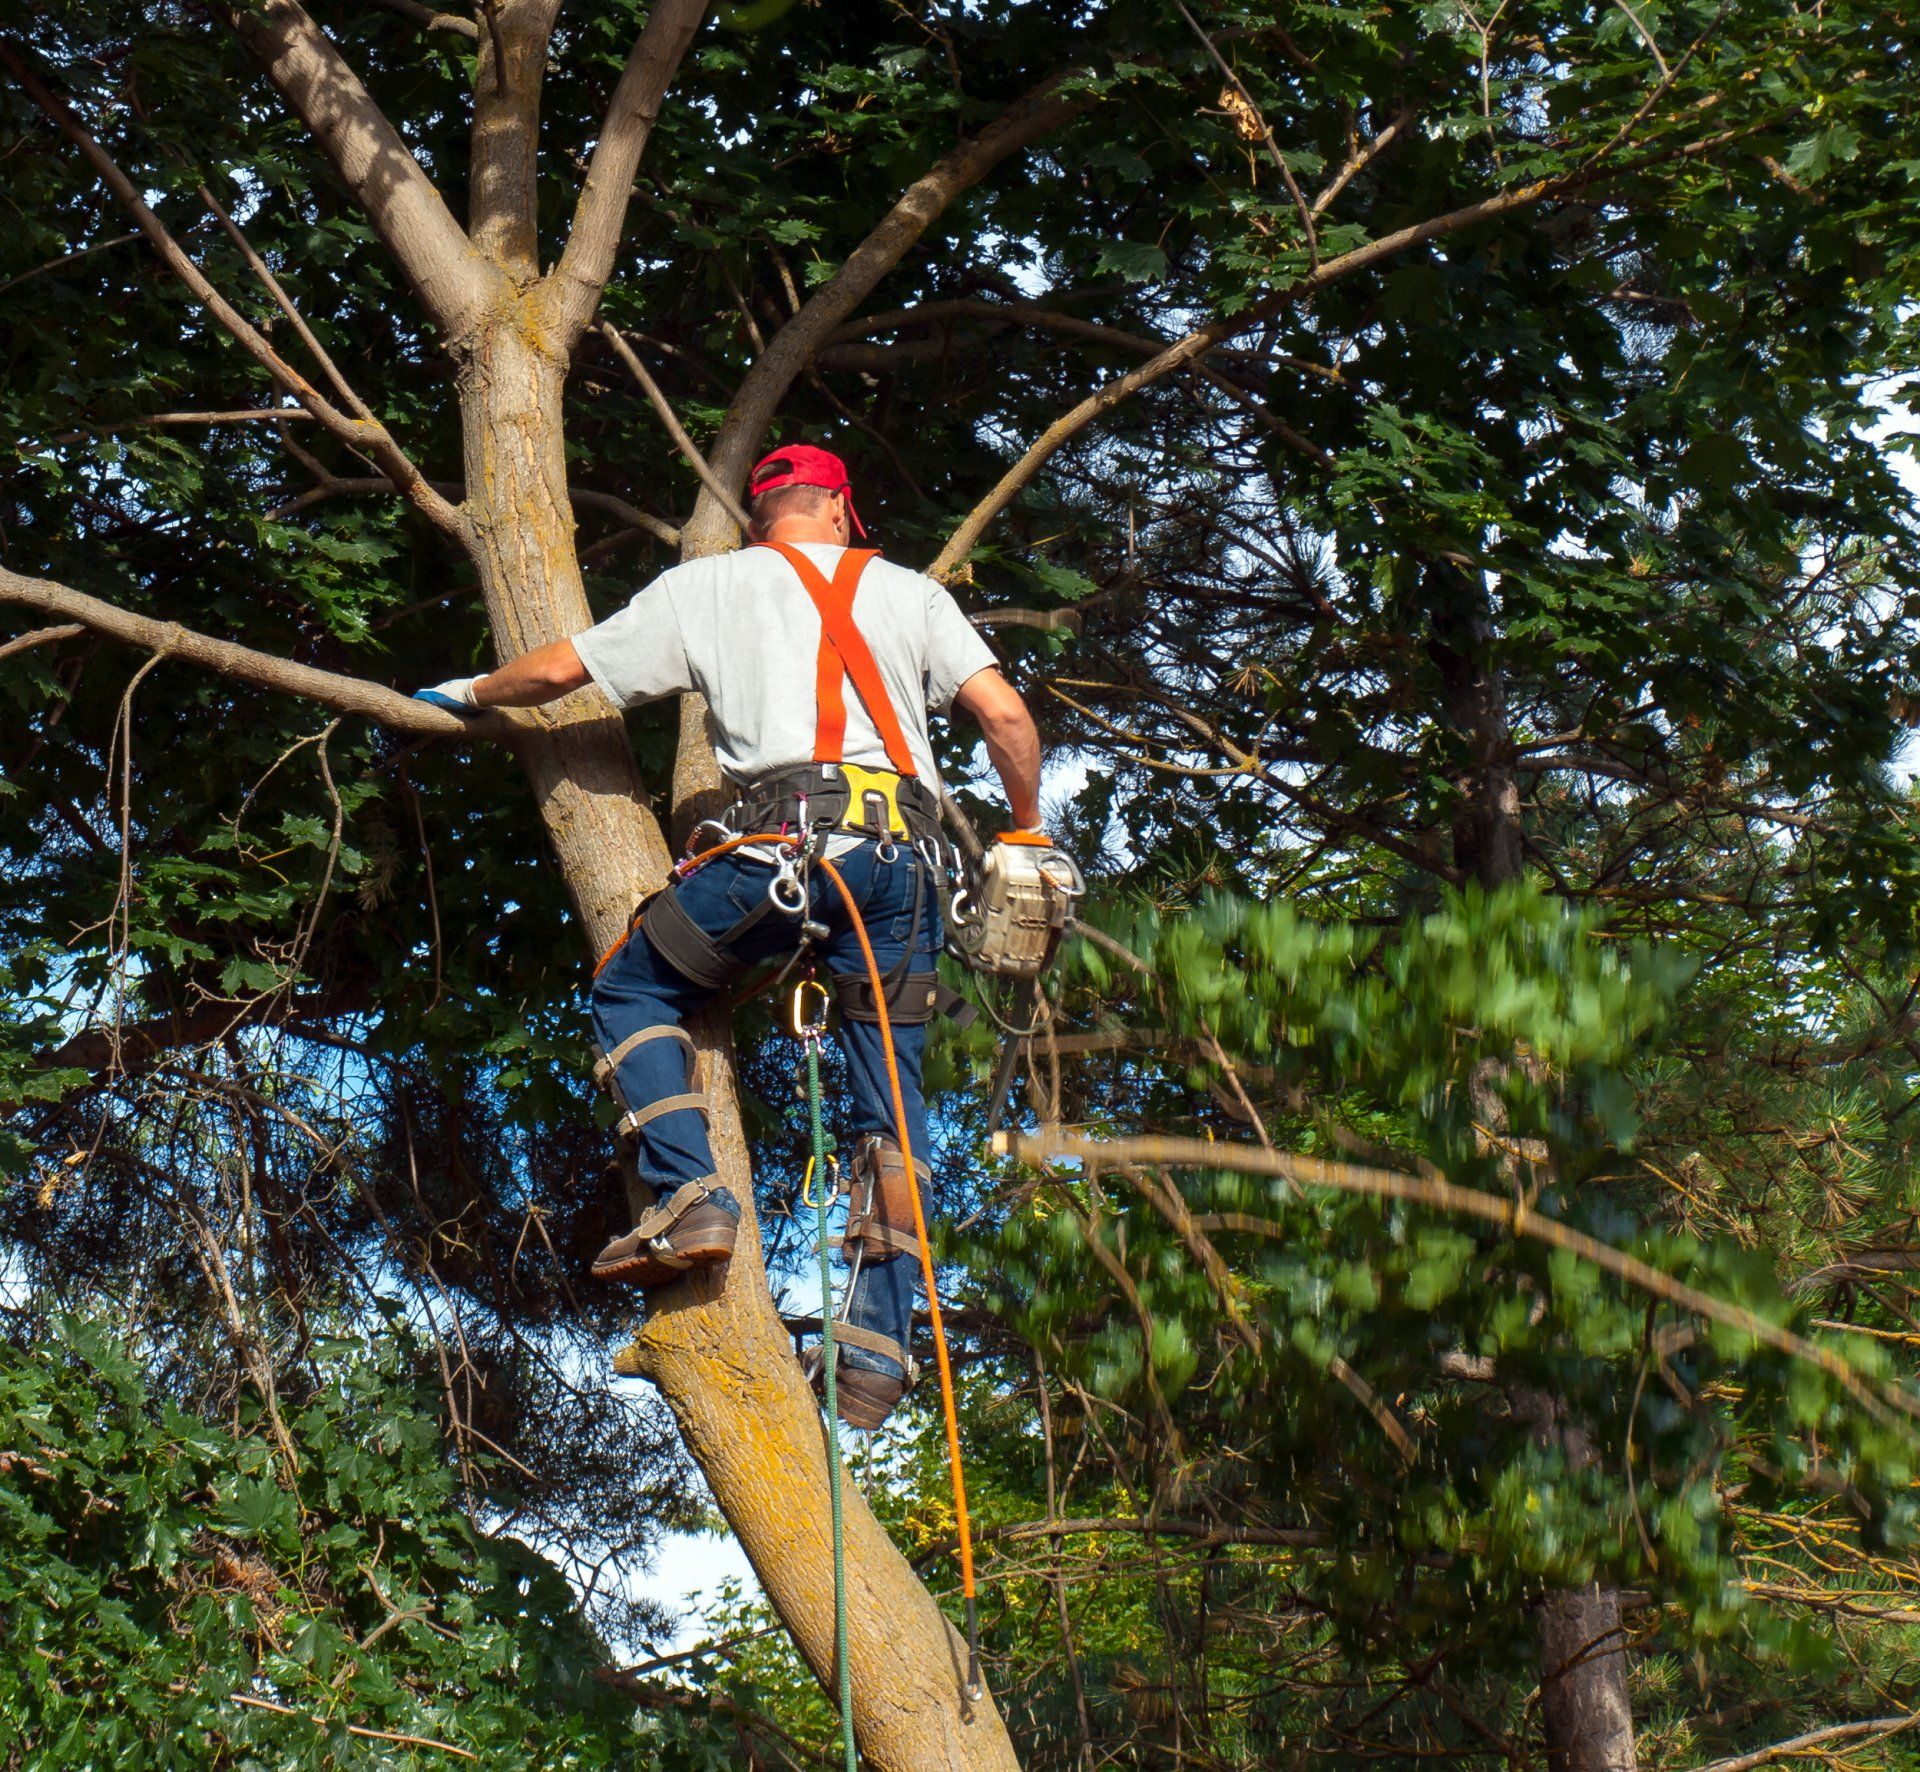 Certified arborist in tree trimming branches to improve tree health